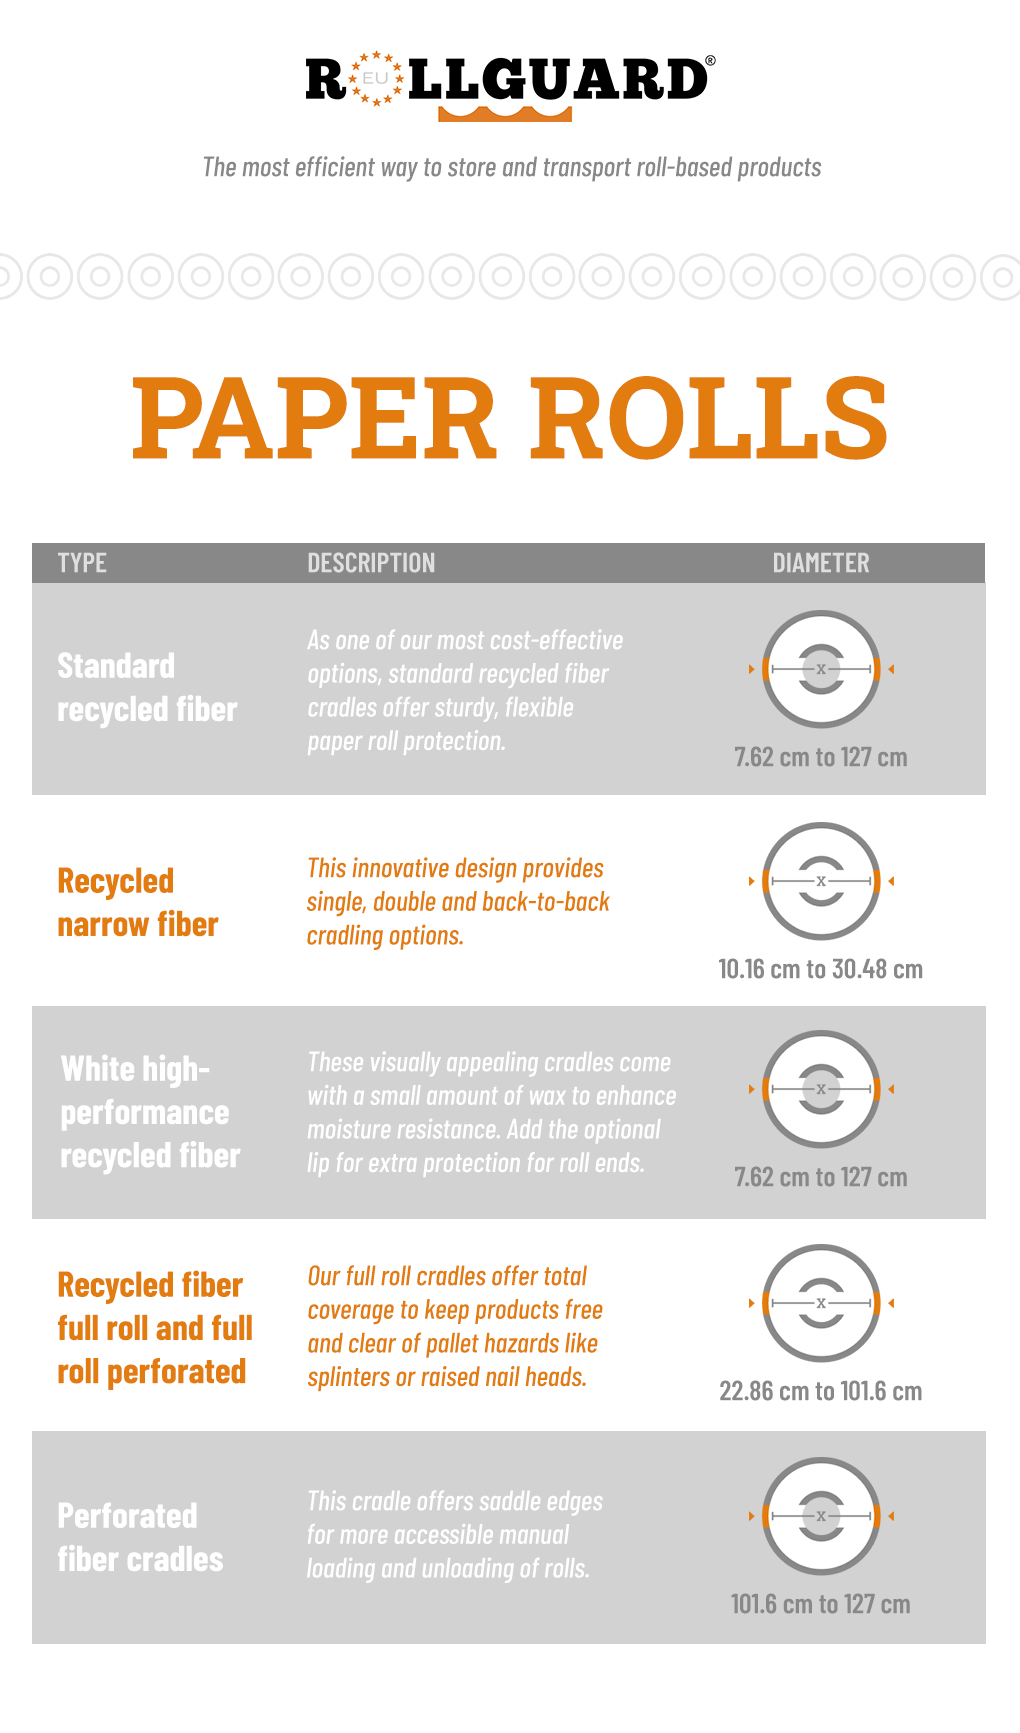 Roll Cradles for paper rolls